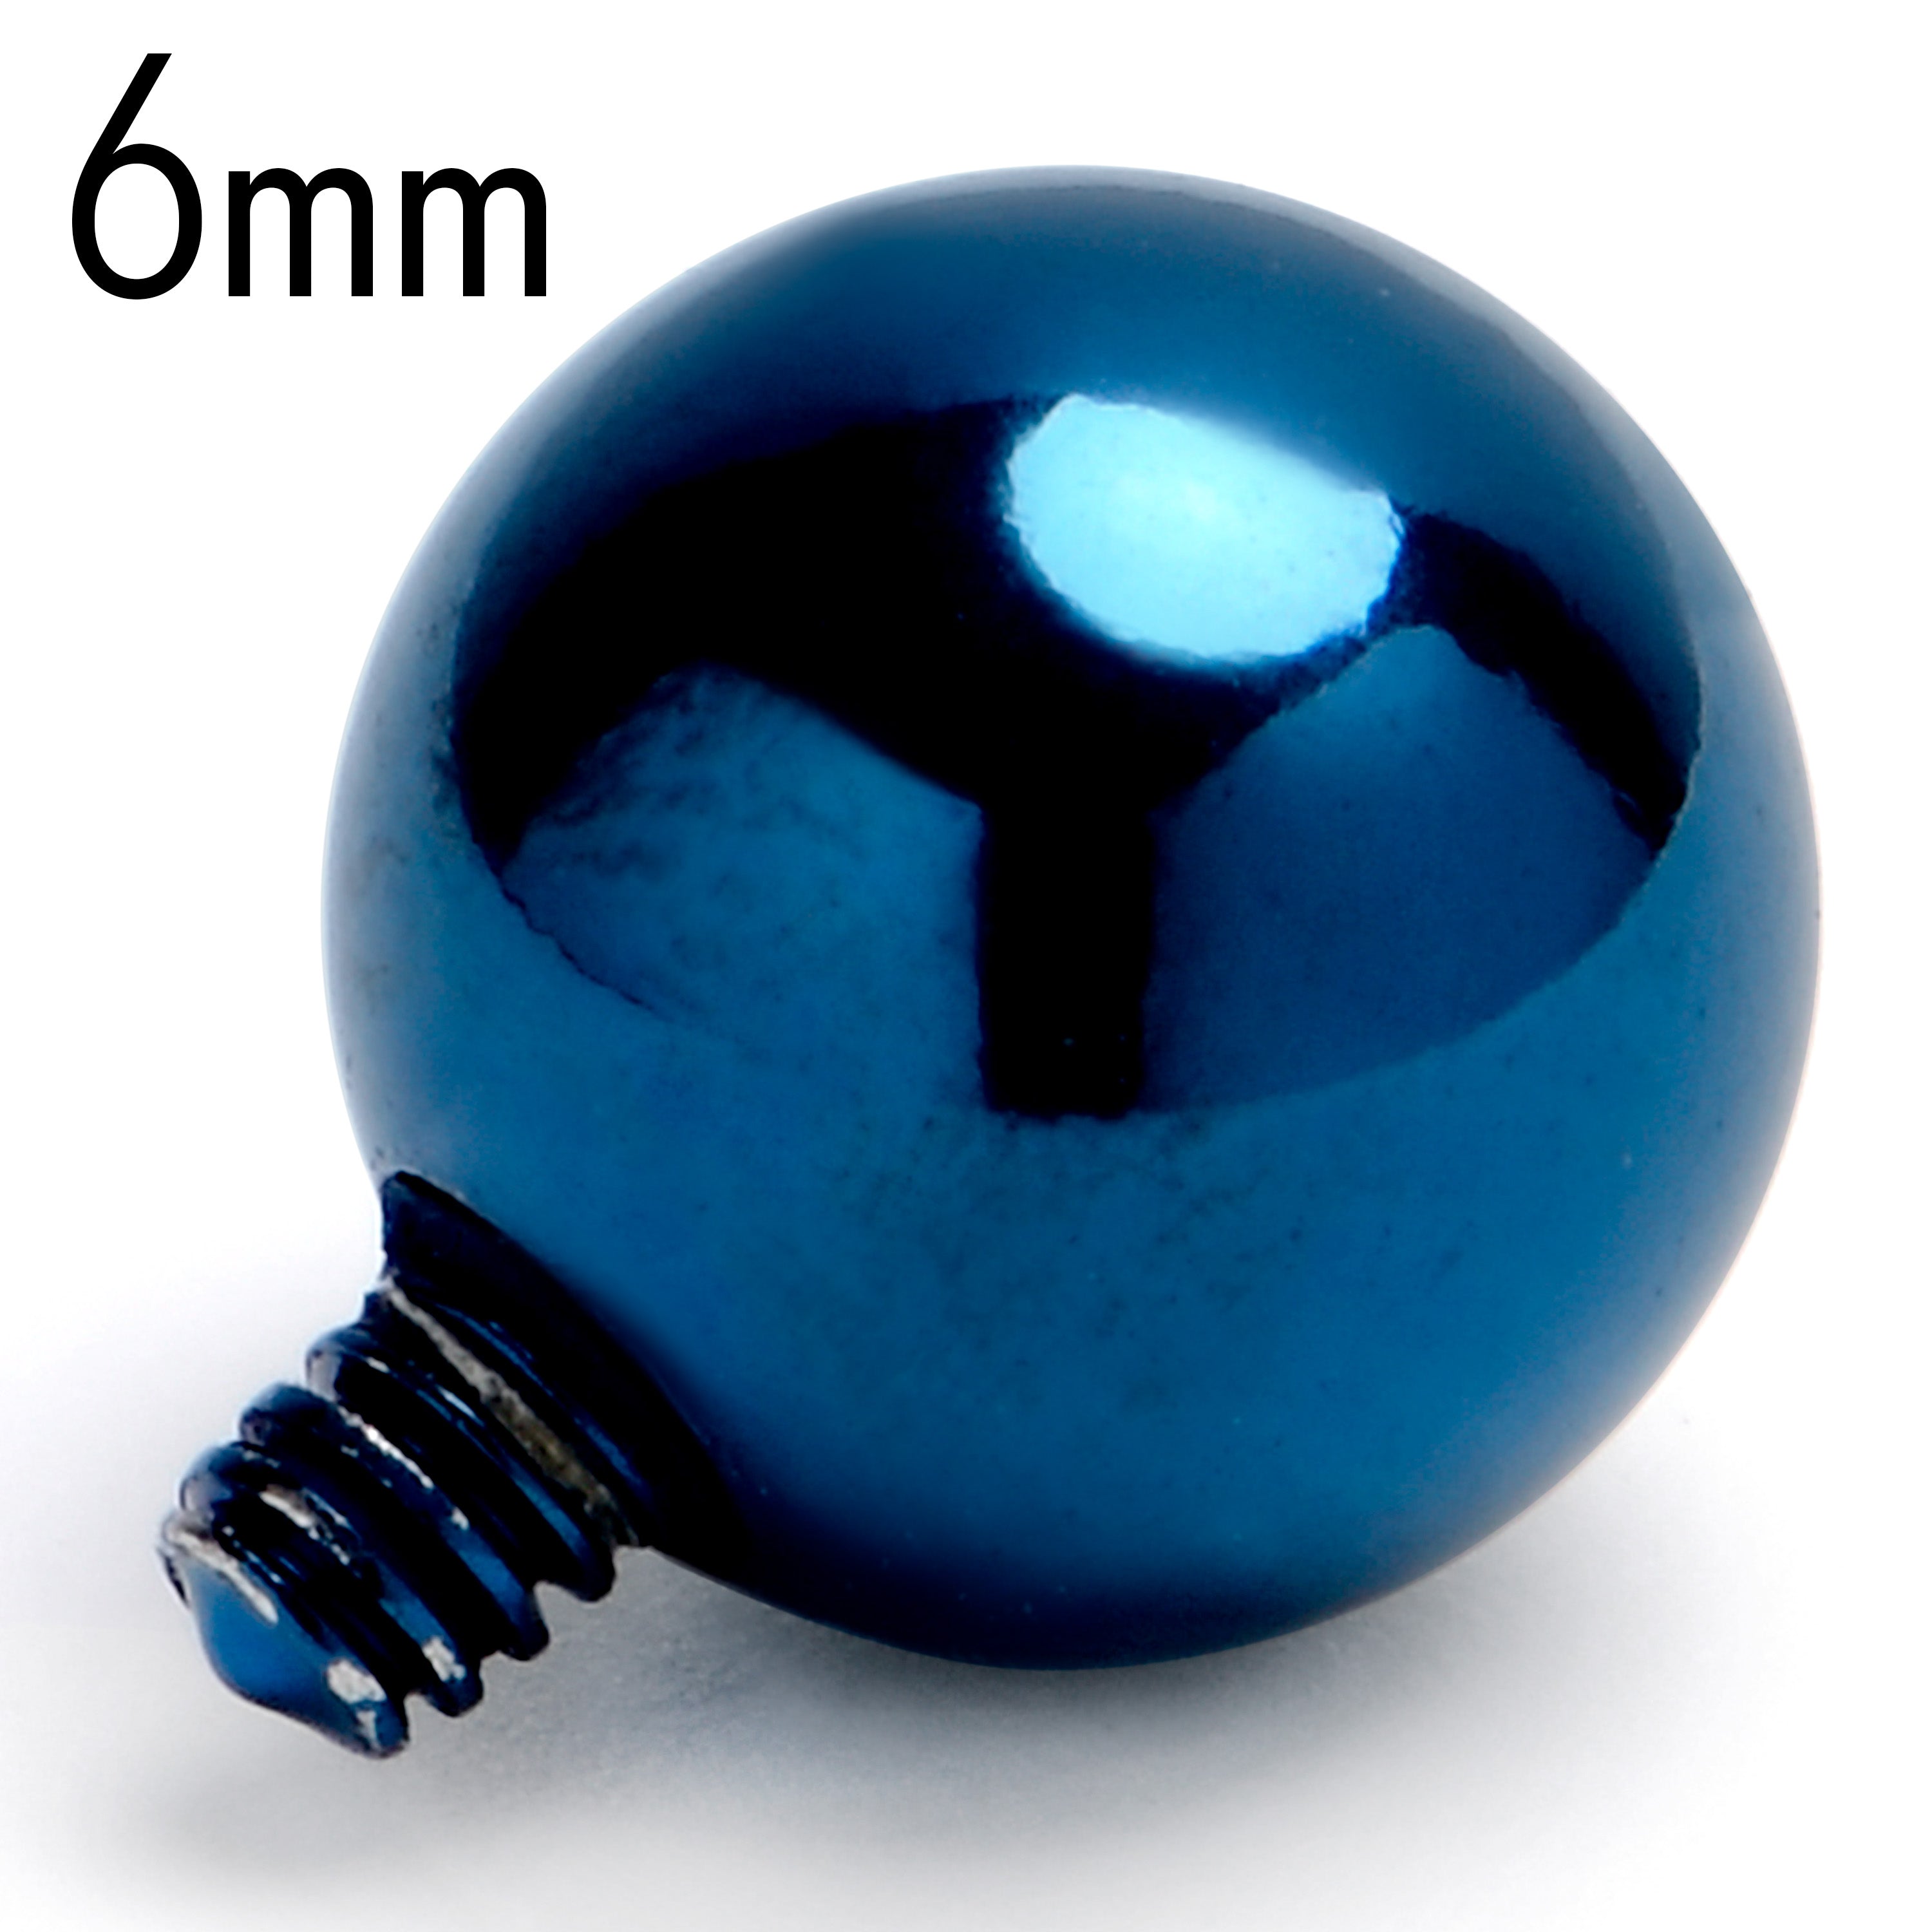 14 Gauge 6mm Blue Replacement Ball End Internally Threaded Jewelry